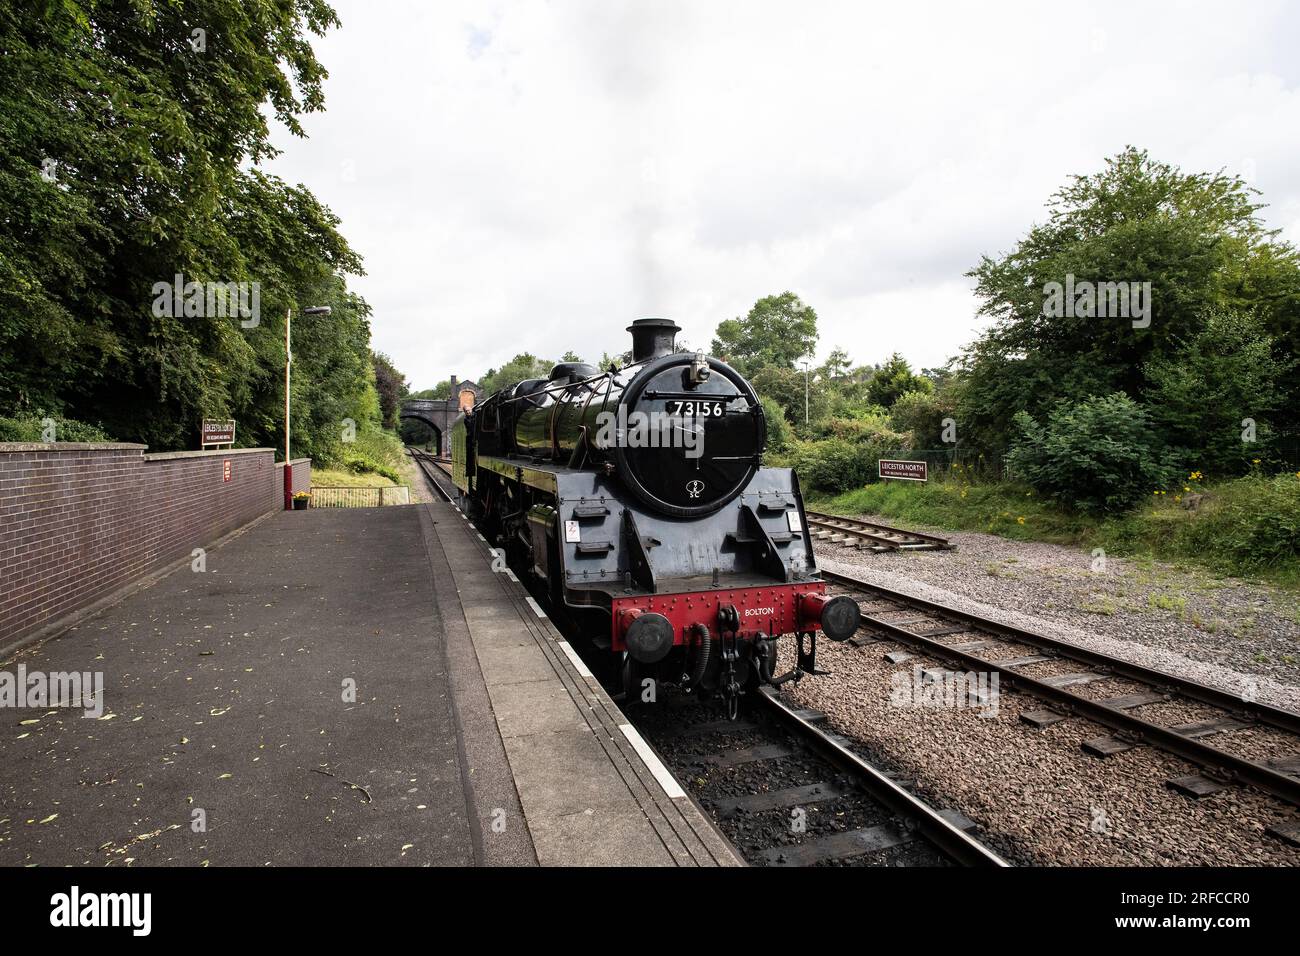 British Railways Standard Class 5MT steam locomotive arriving at Leicester North station on the GCR heritage railway line Stock Photo